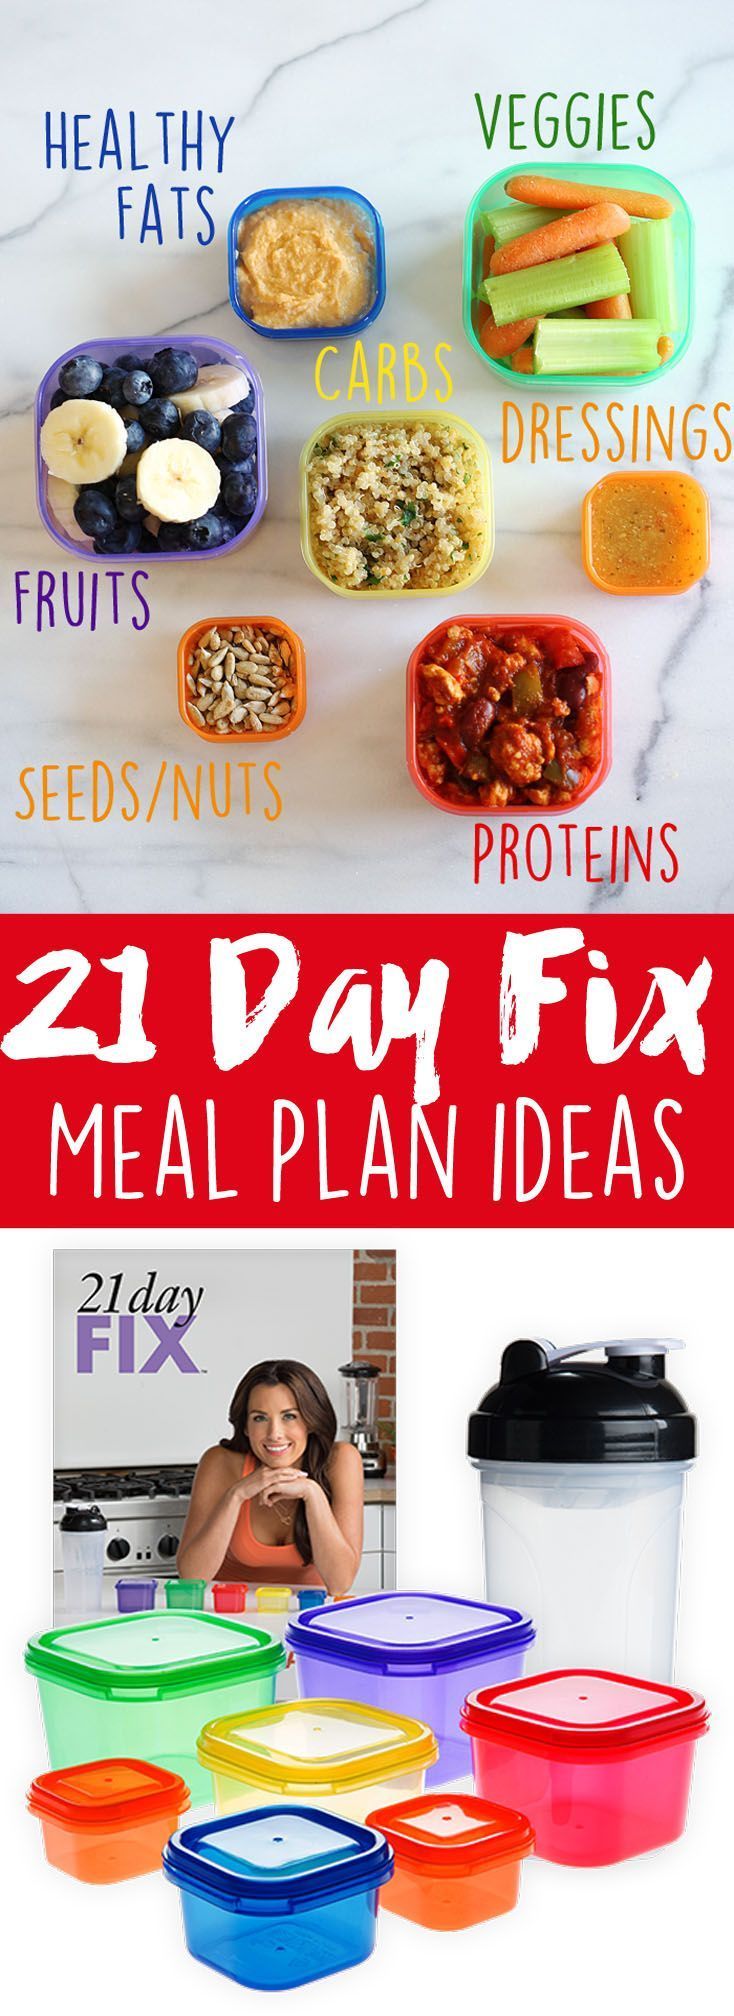 My 21 Day Fix Review -   14 21 day
 ideas